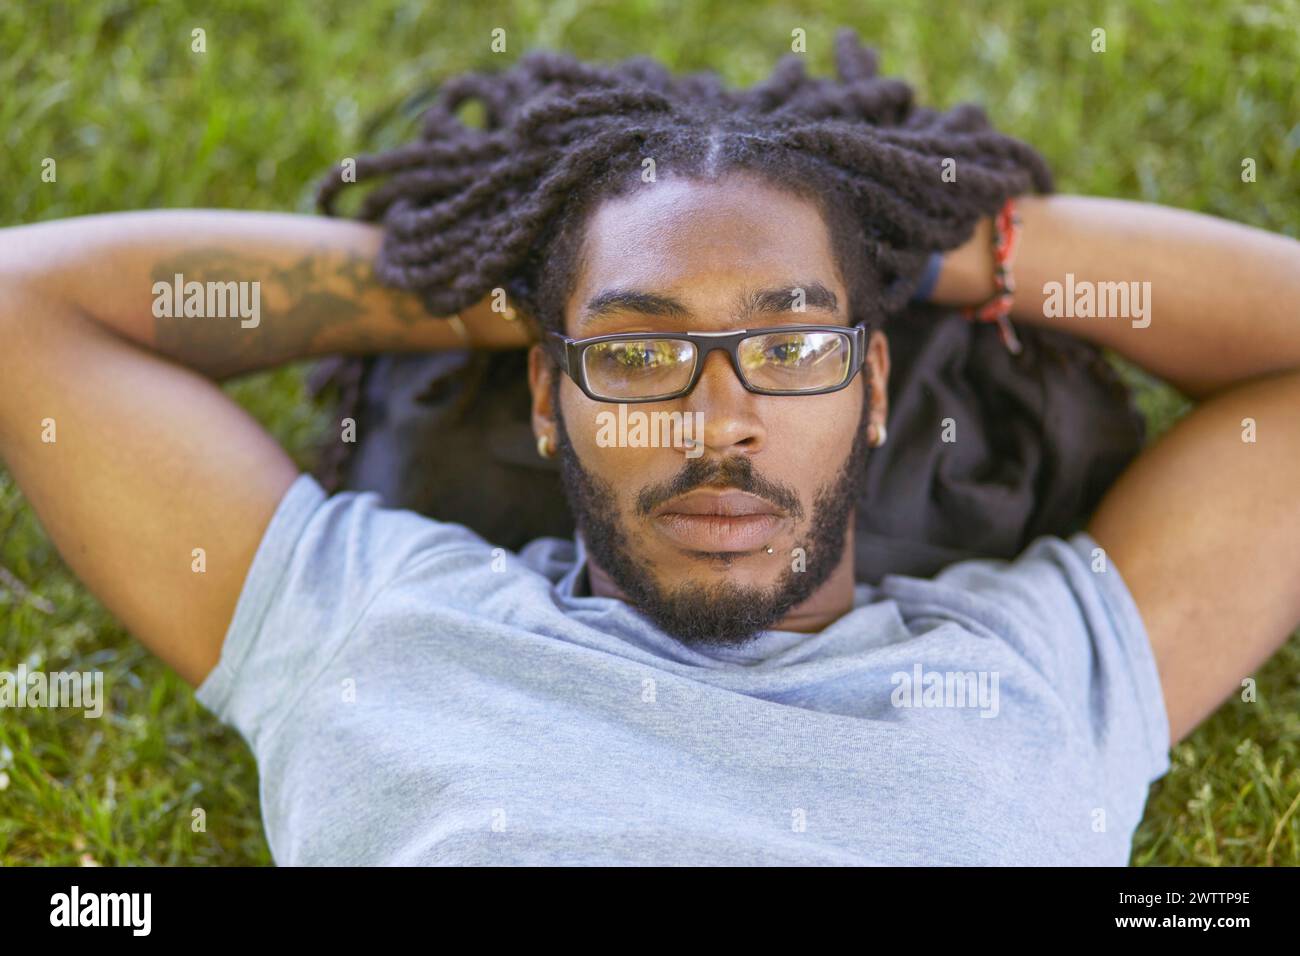 Man relaxing on grass with hands behind head Stock Photo